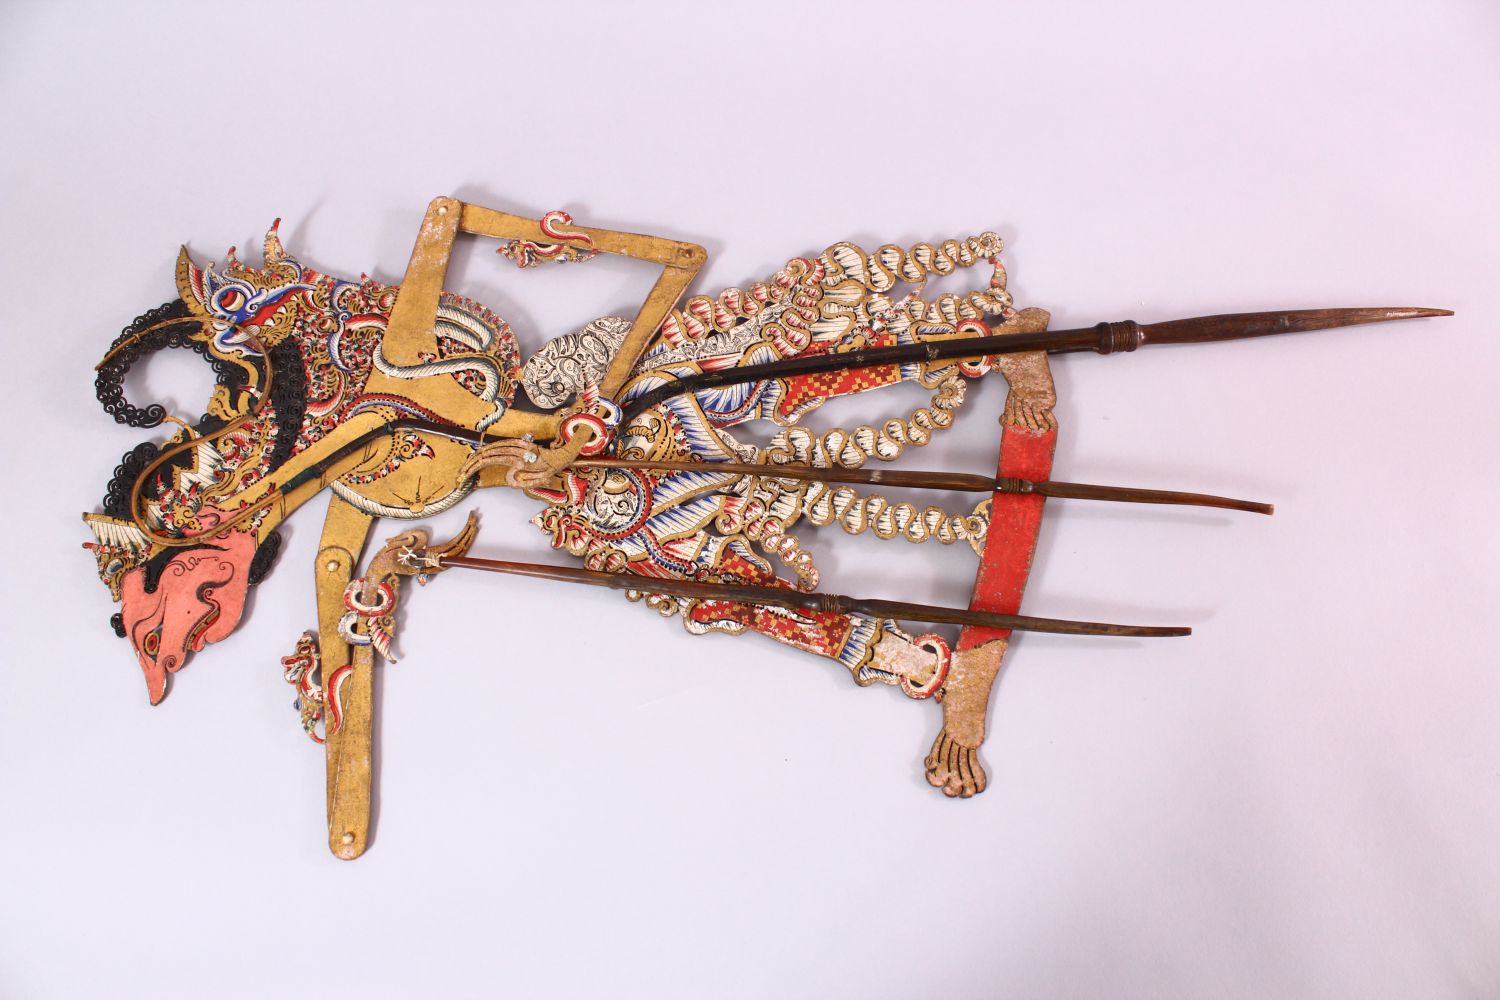 A LARGE 19TH CENTURY INDONESIAN SHADOW PUPPET WITH RHINO HORN STICKS, 73cm. - Image 5 of 7